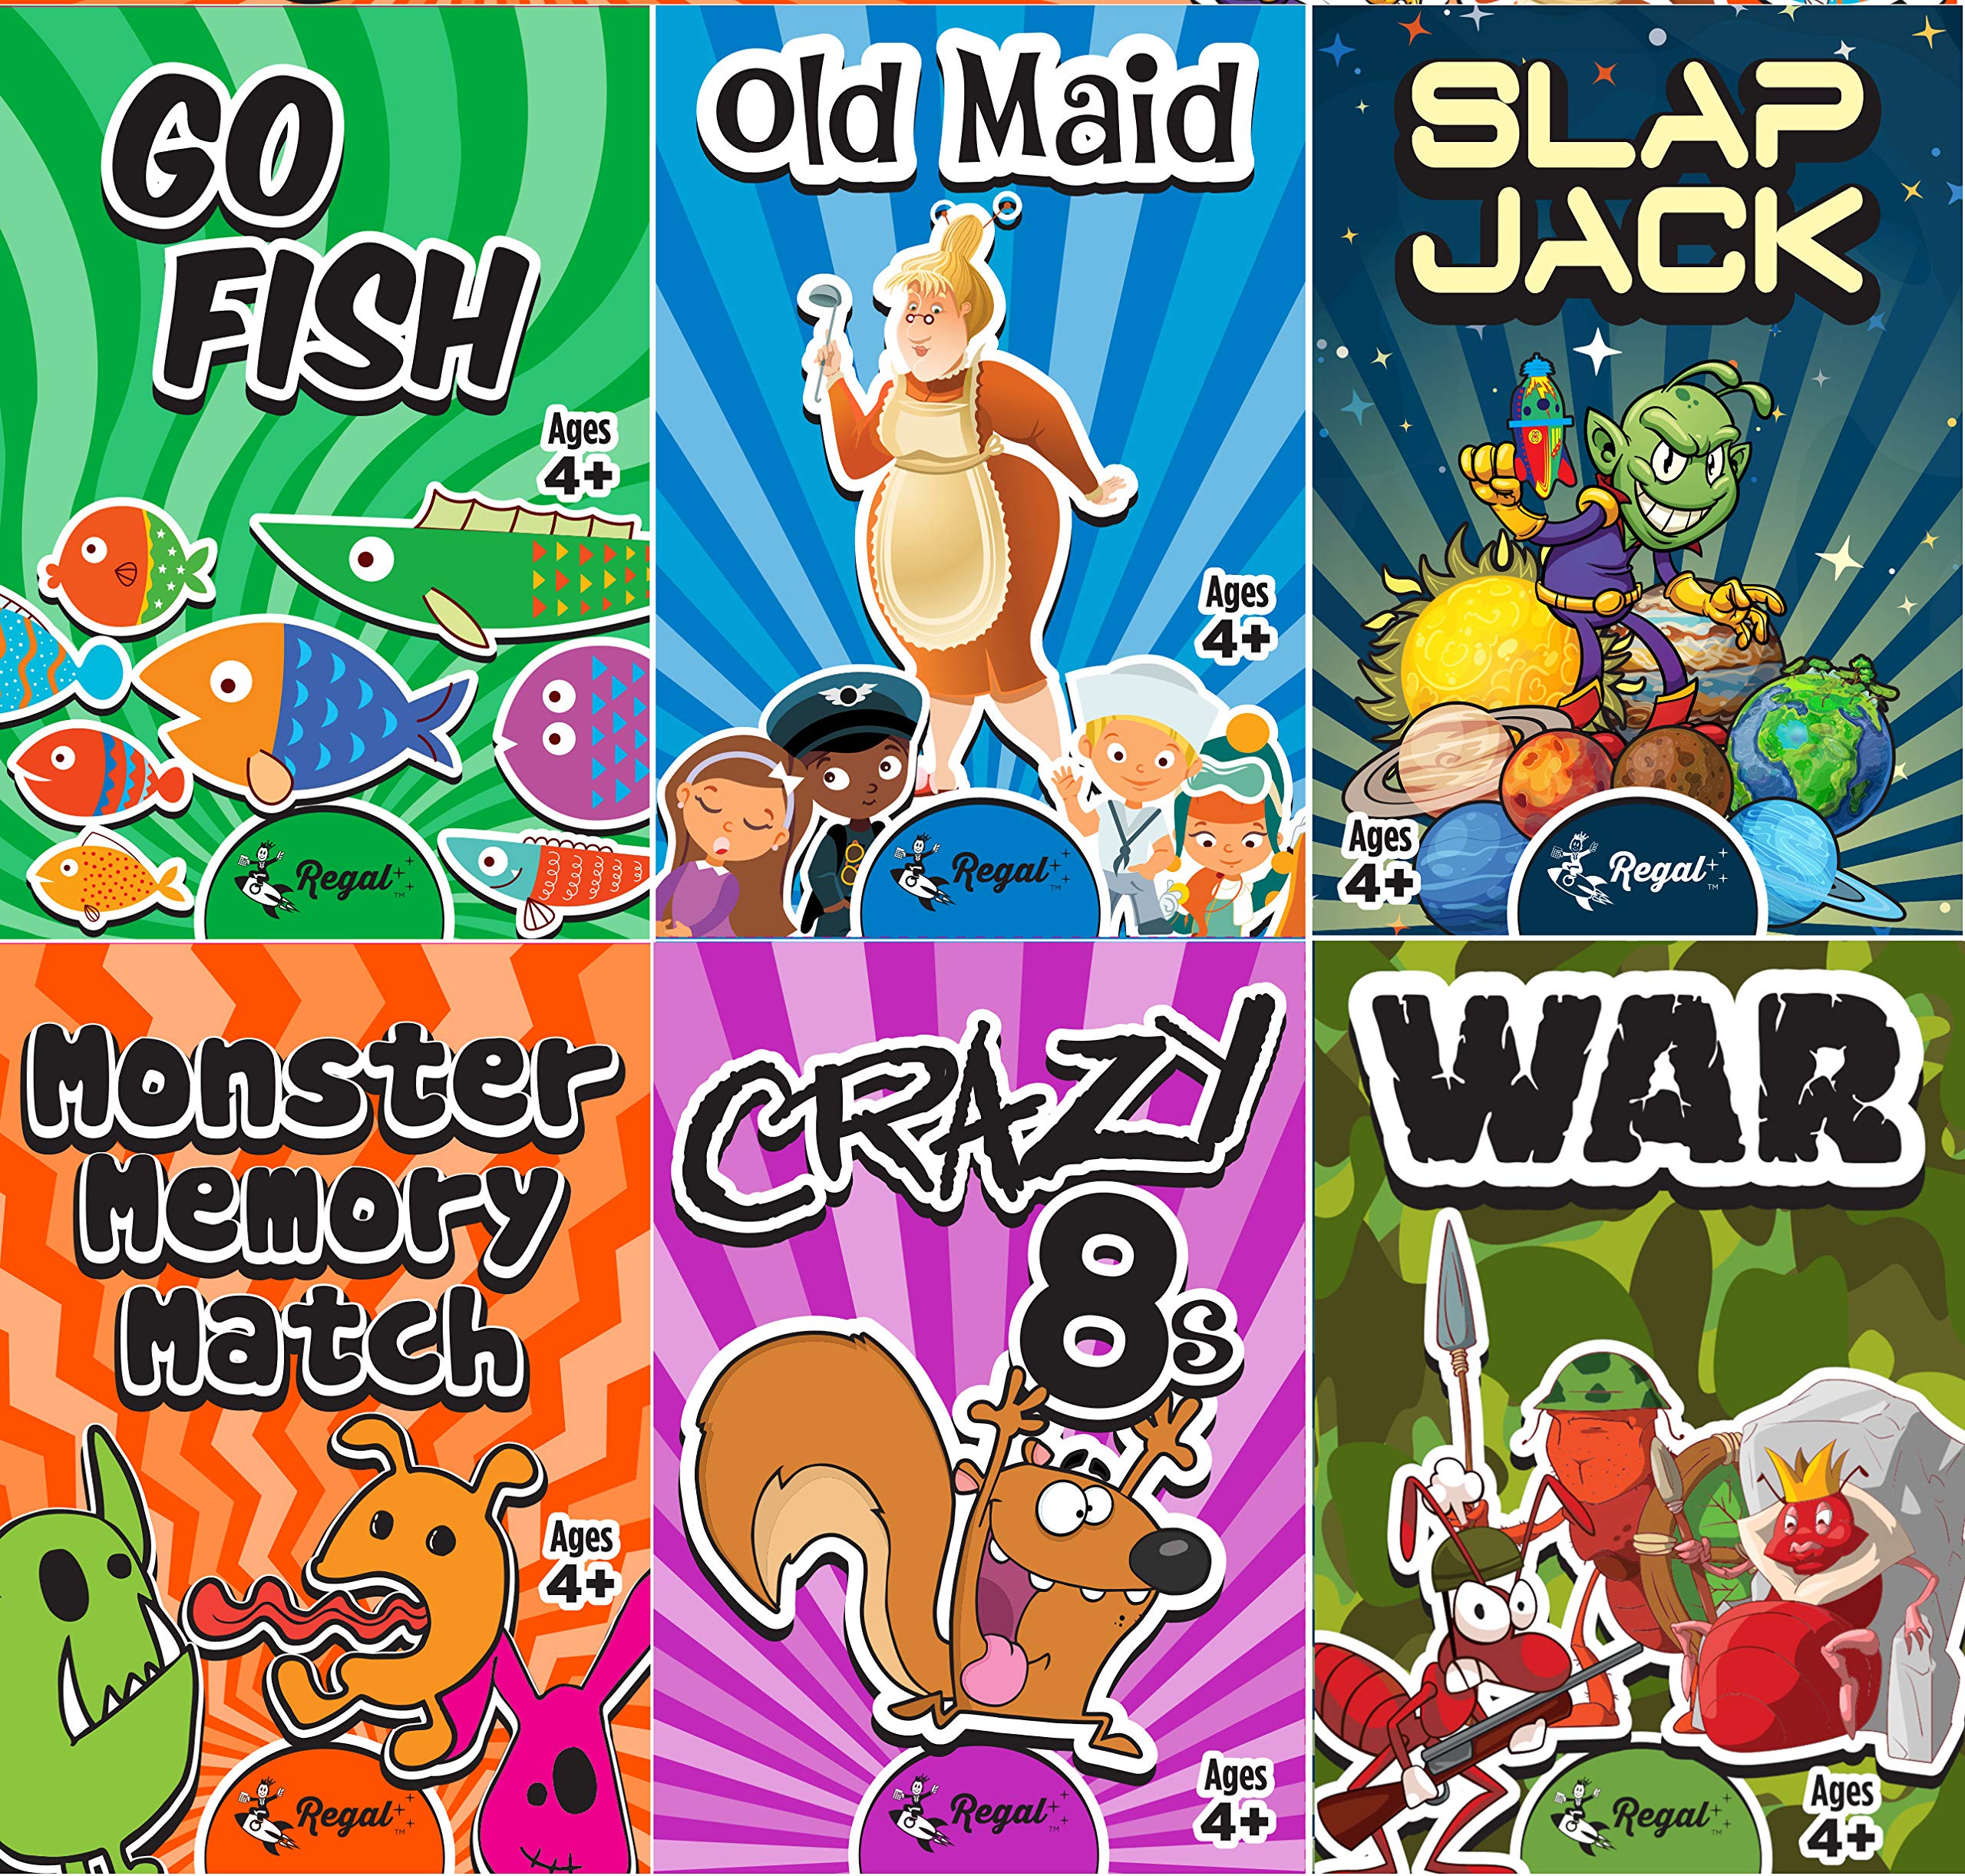 Regal Games - Kids Classic Card Games - Includes Old Maid, Go Fish, Slapjack, Crazy 8's, War, and Silly Monster Memory Match- for Family Game Nights, Parties - Set of 6 Games